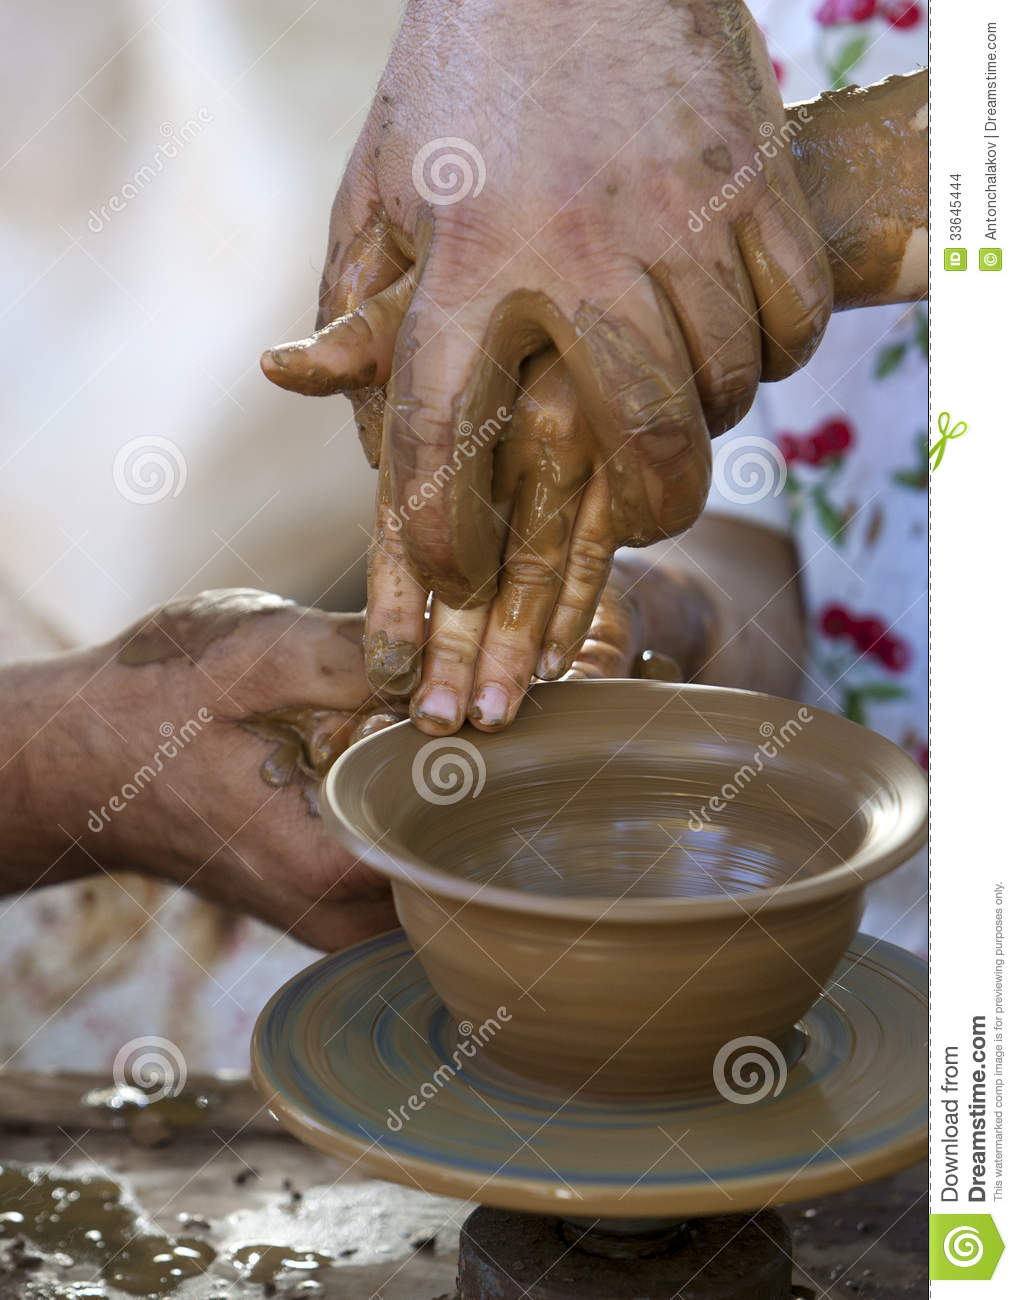 Potter Clay Bowl Stock Images   Image  33645444